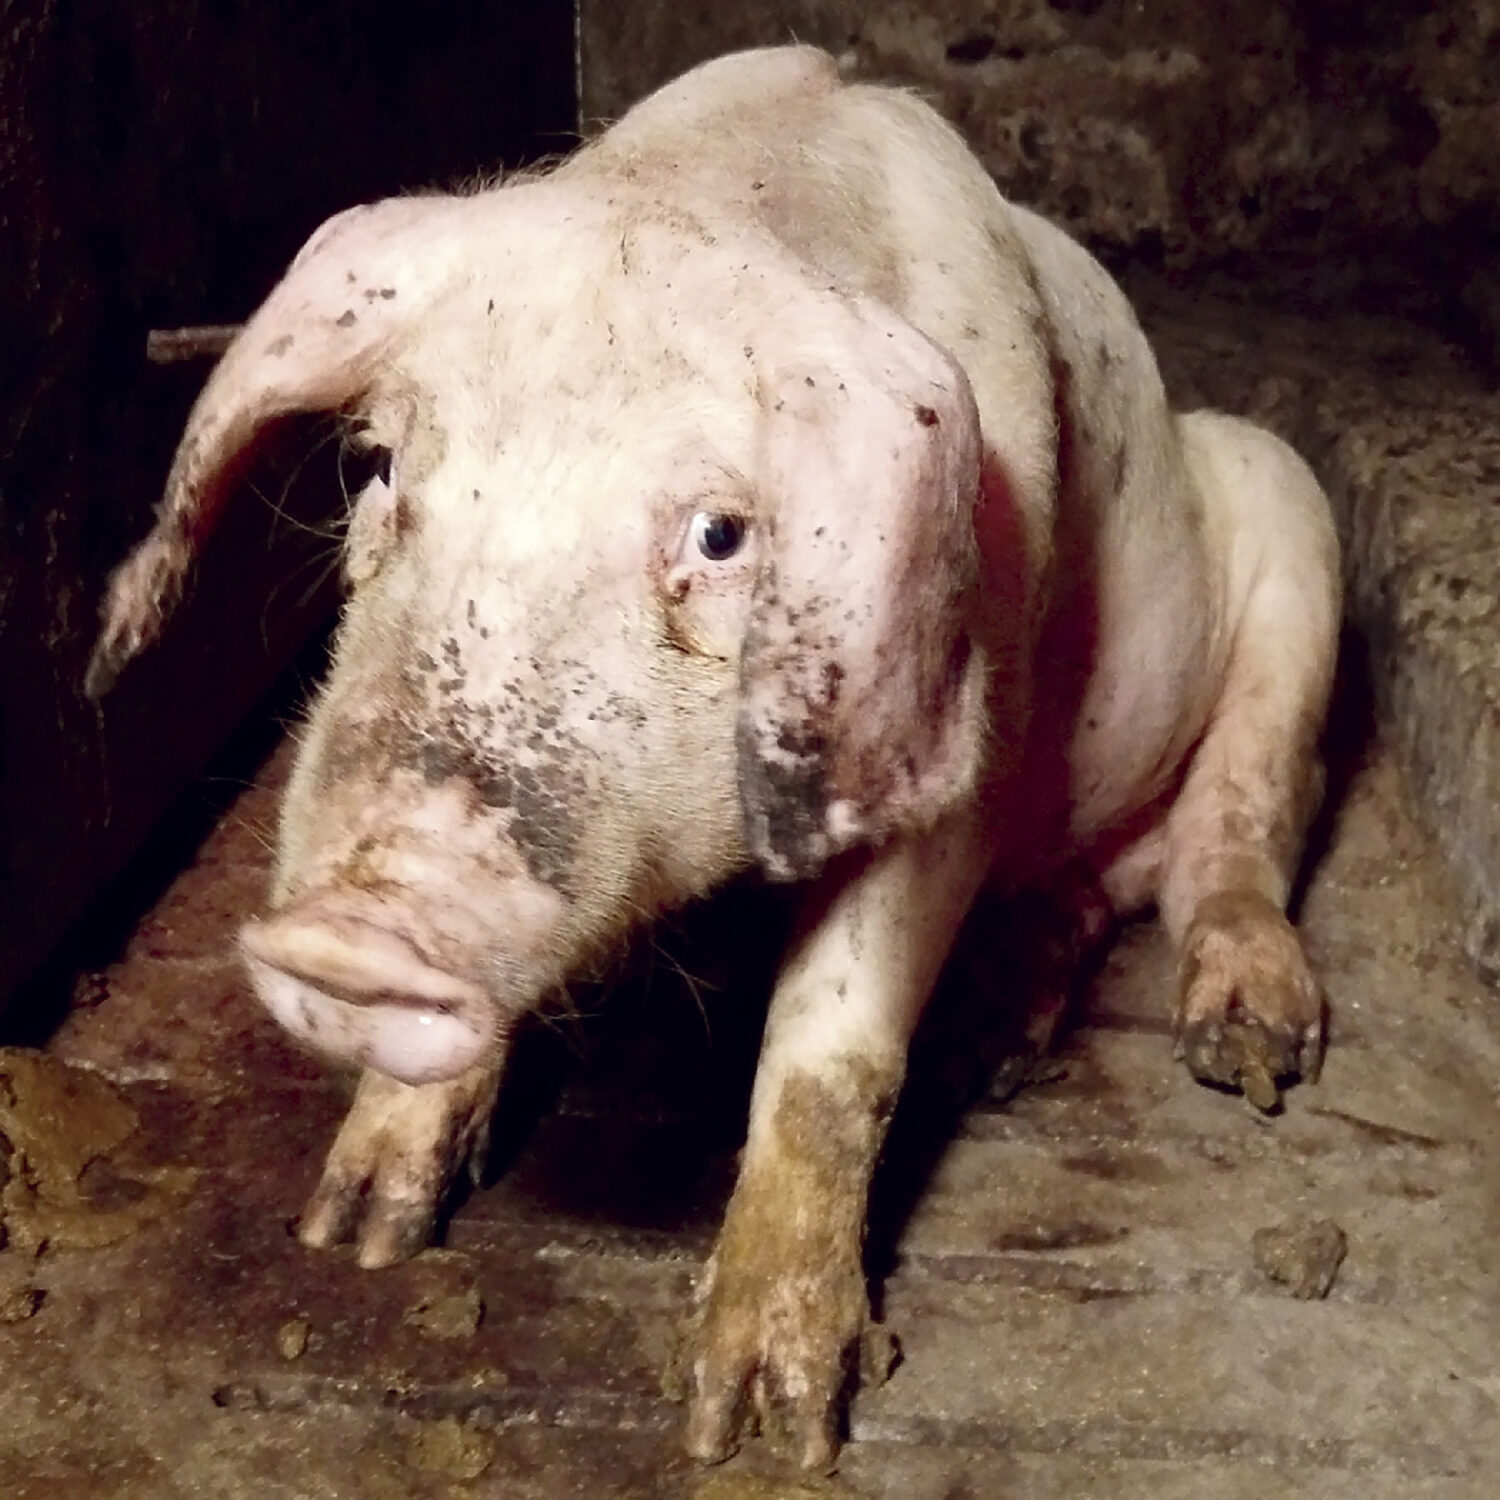 Pig covered in feces on factory farm